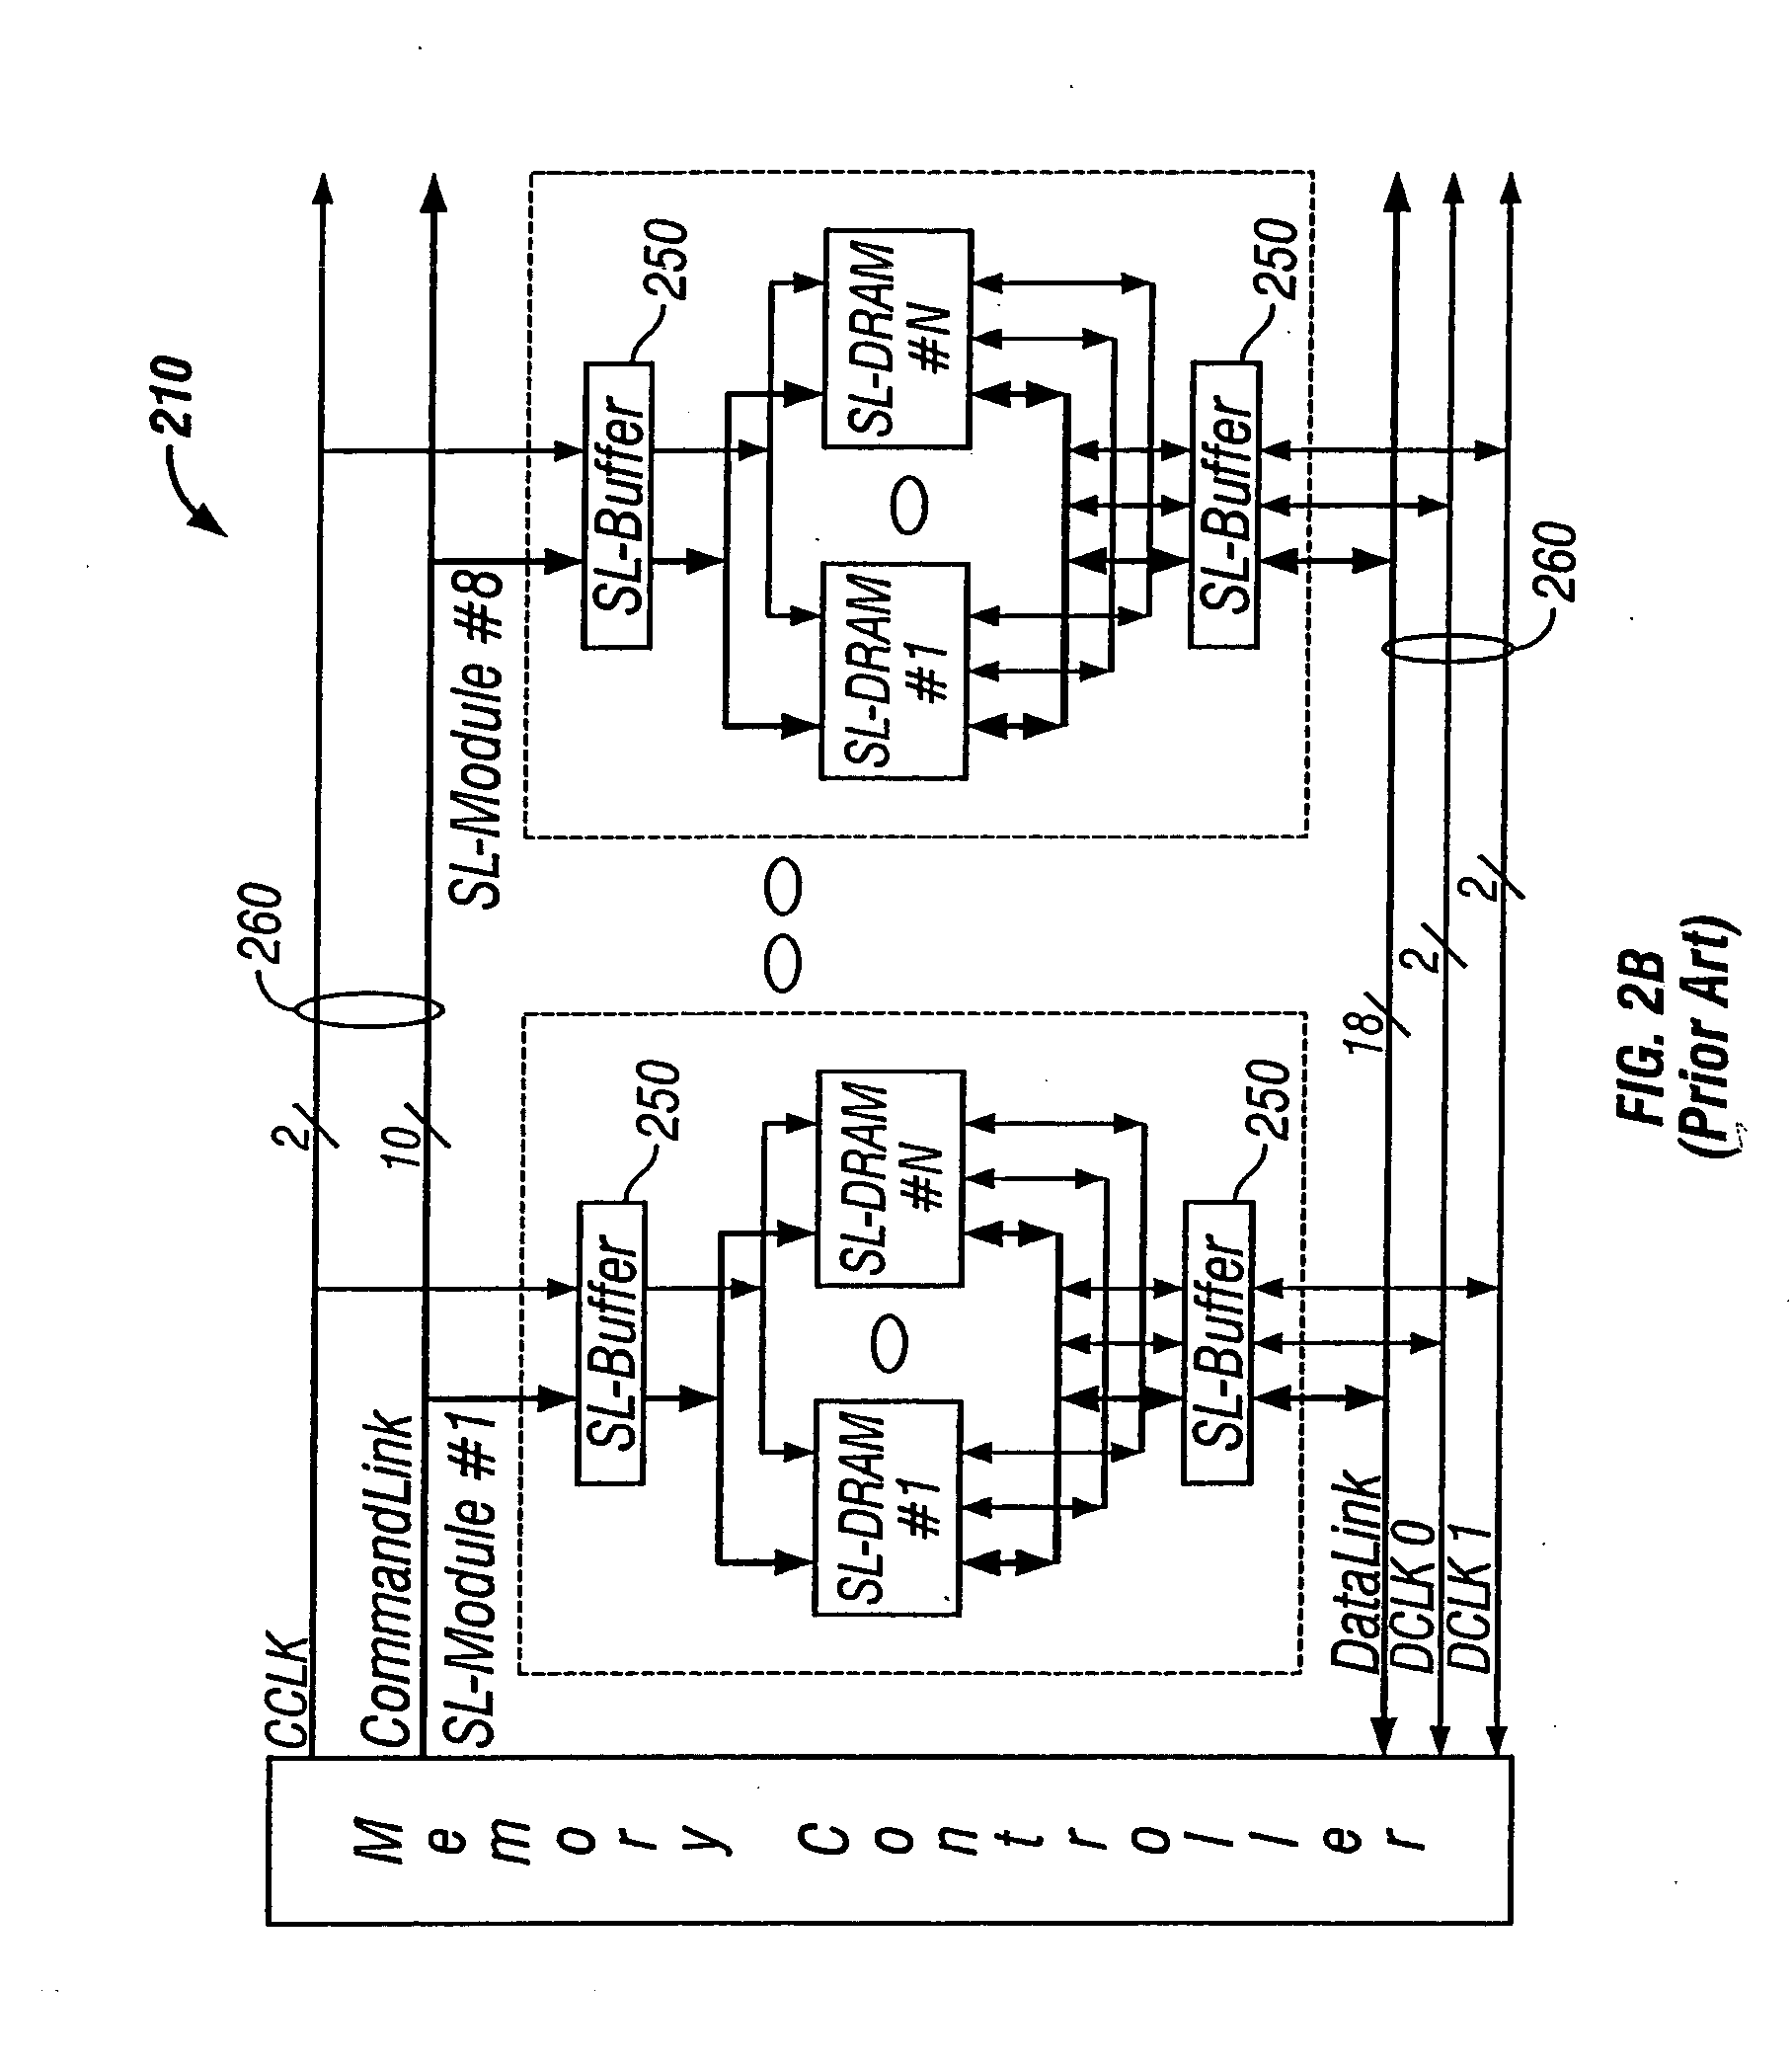 Method of operating a memory system including an integrated circuit buffer device